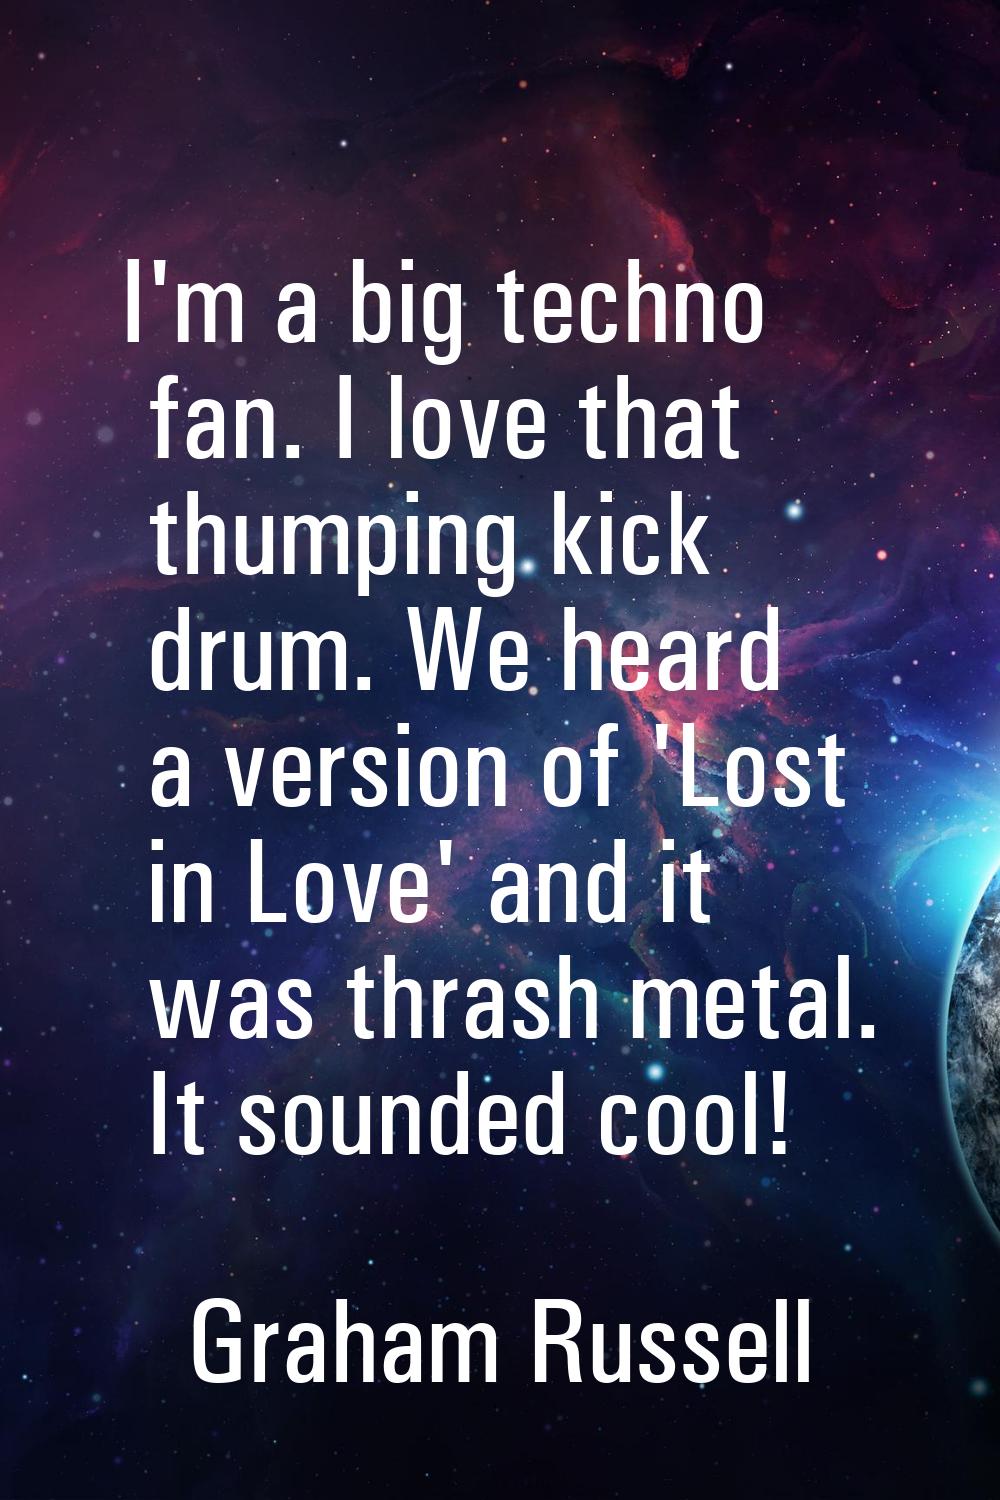 I'm a big techno fan. I love that thumping kick drum. We heard a version of 'Lost in Love' and it w